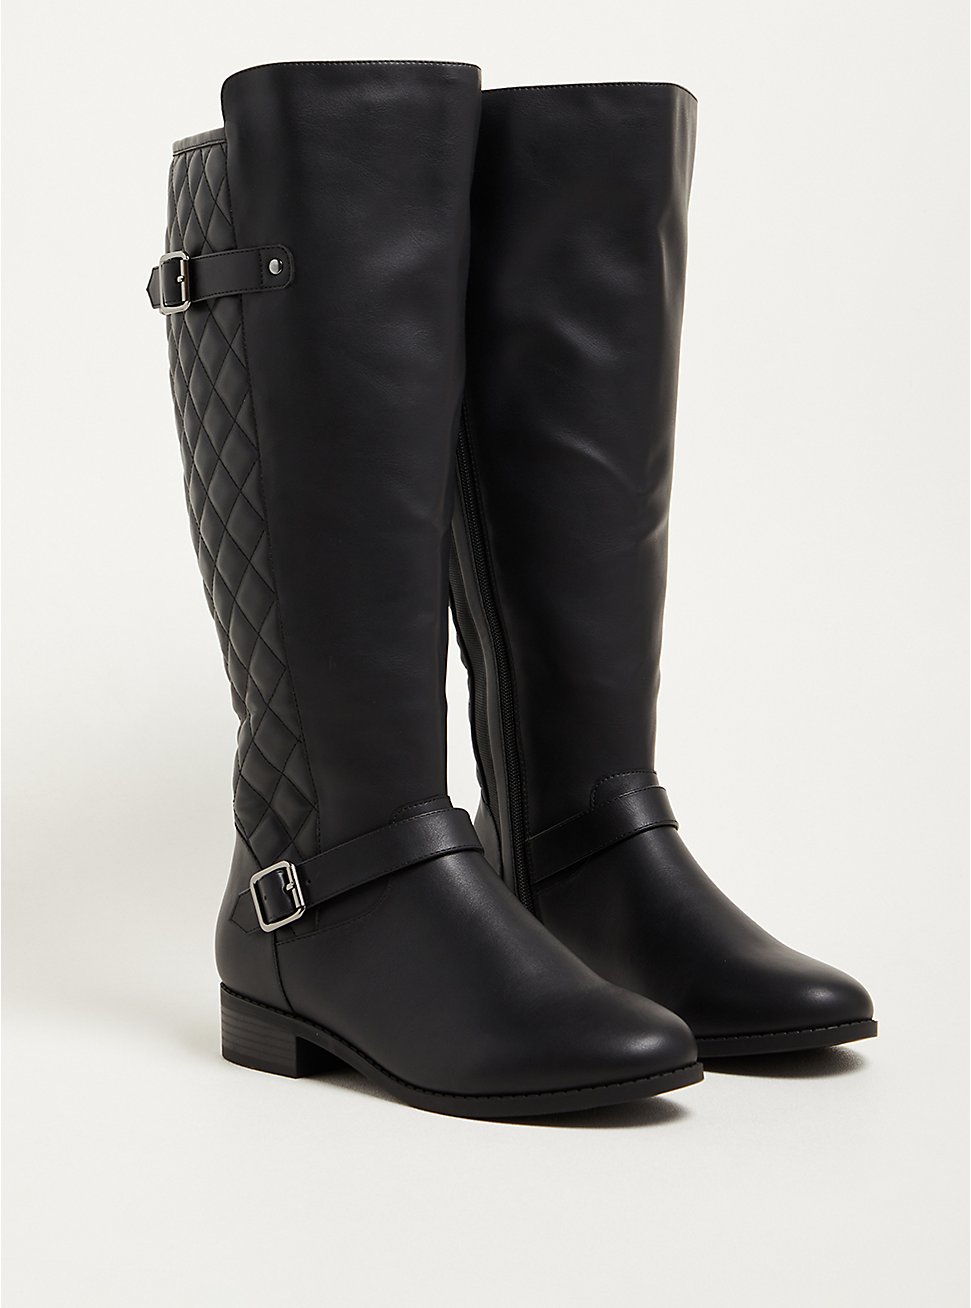 Plus Size Quilted Knee Boot - Faux Leather Black (WW), BLACK, hi-res